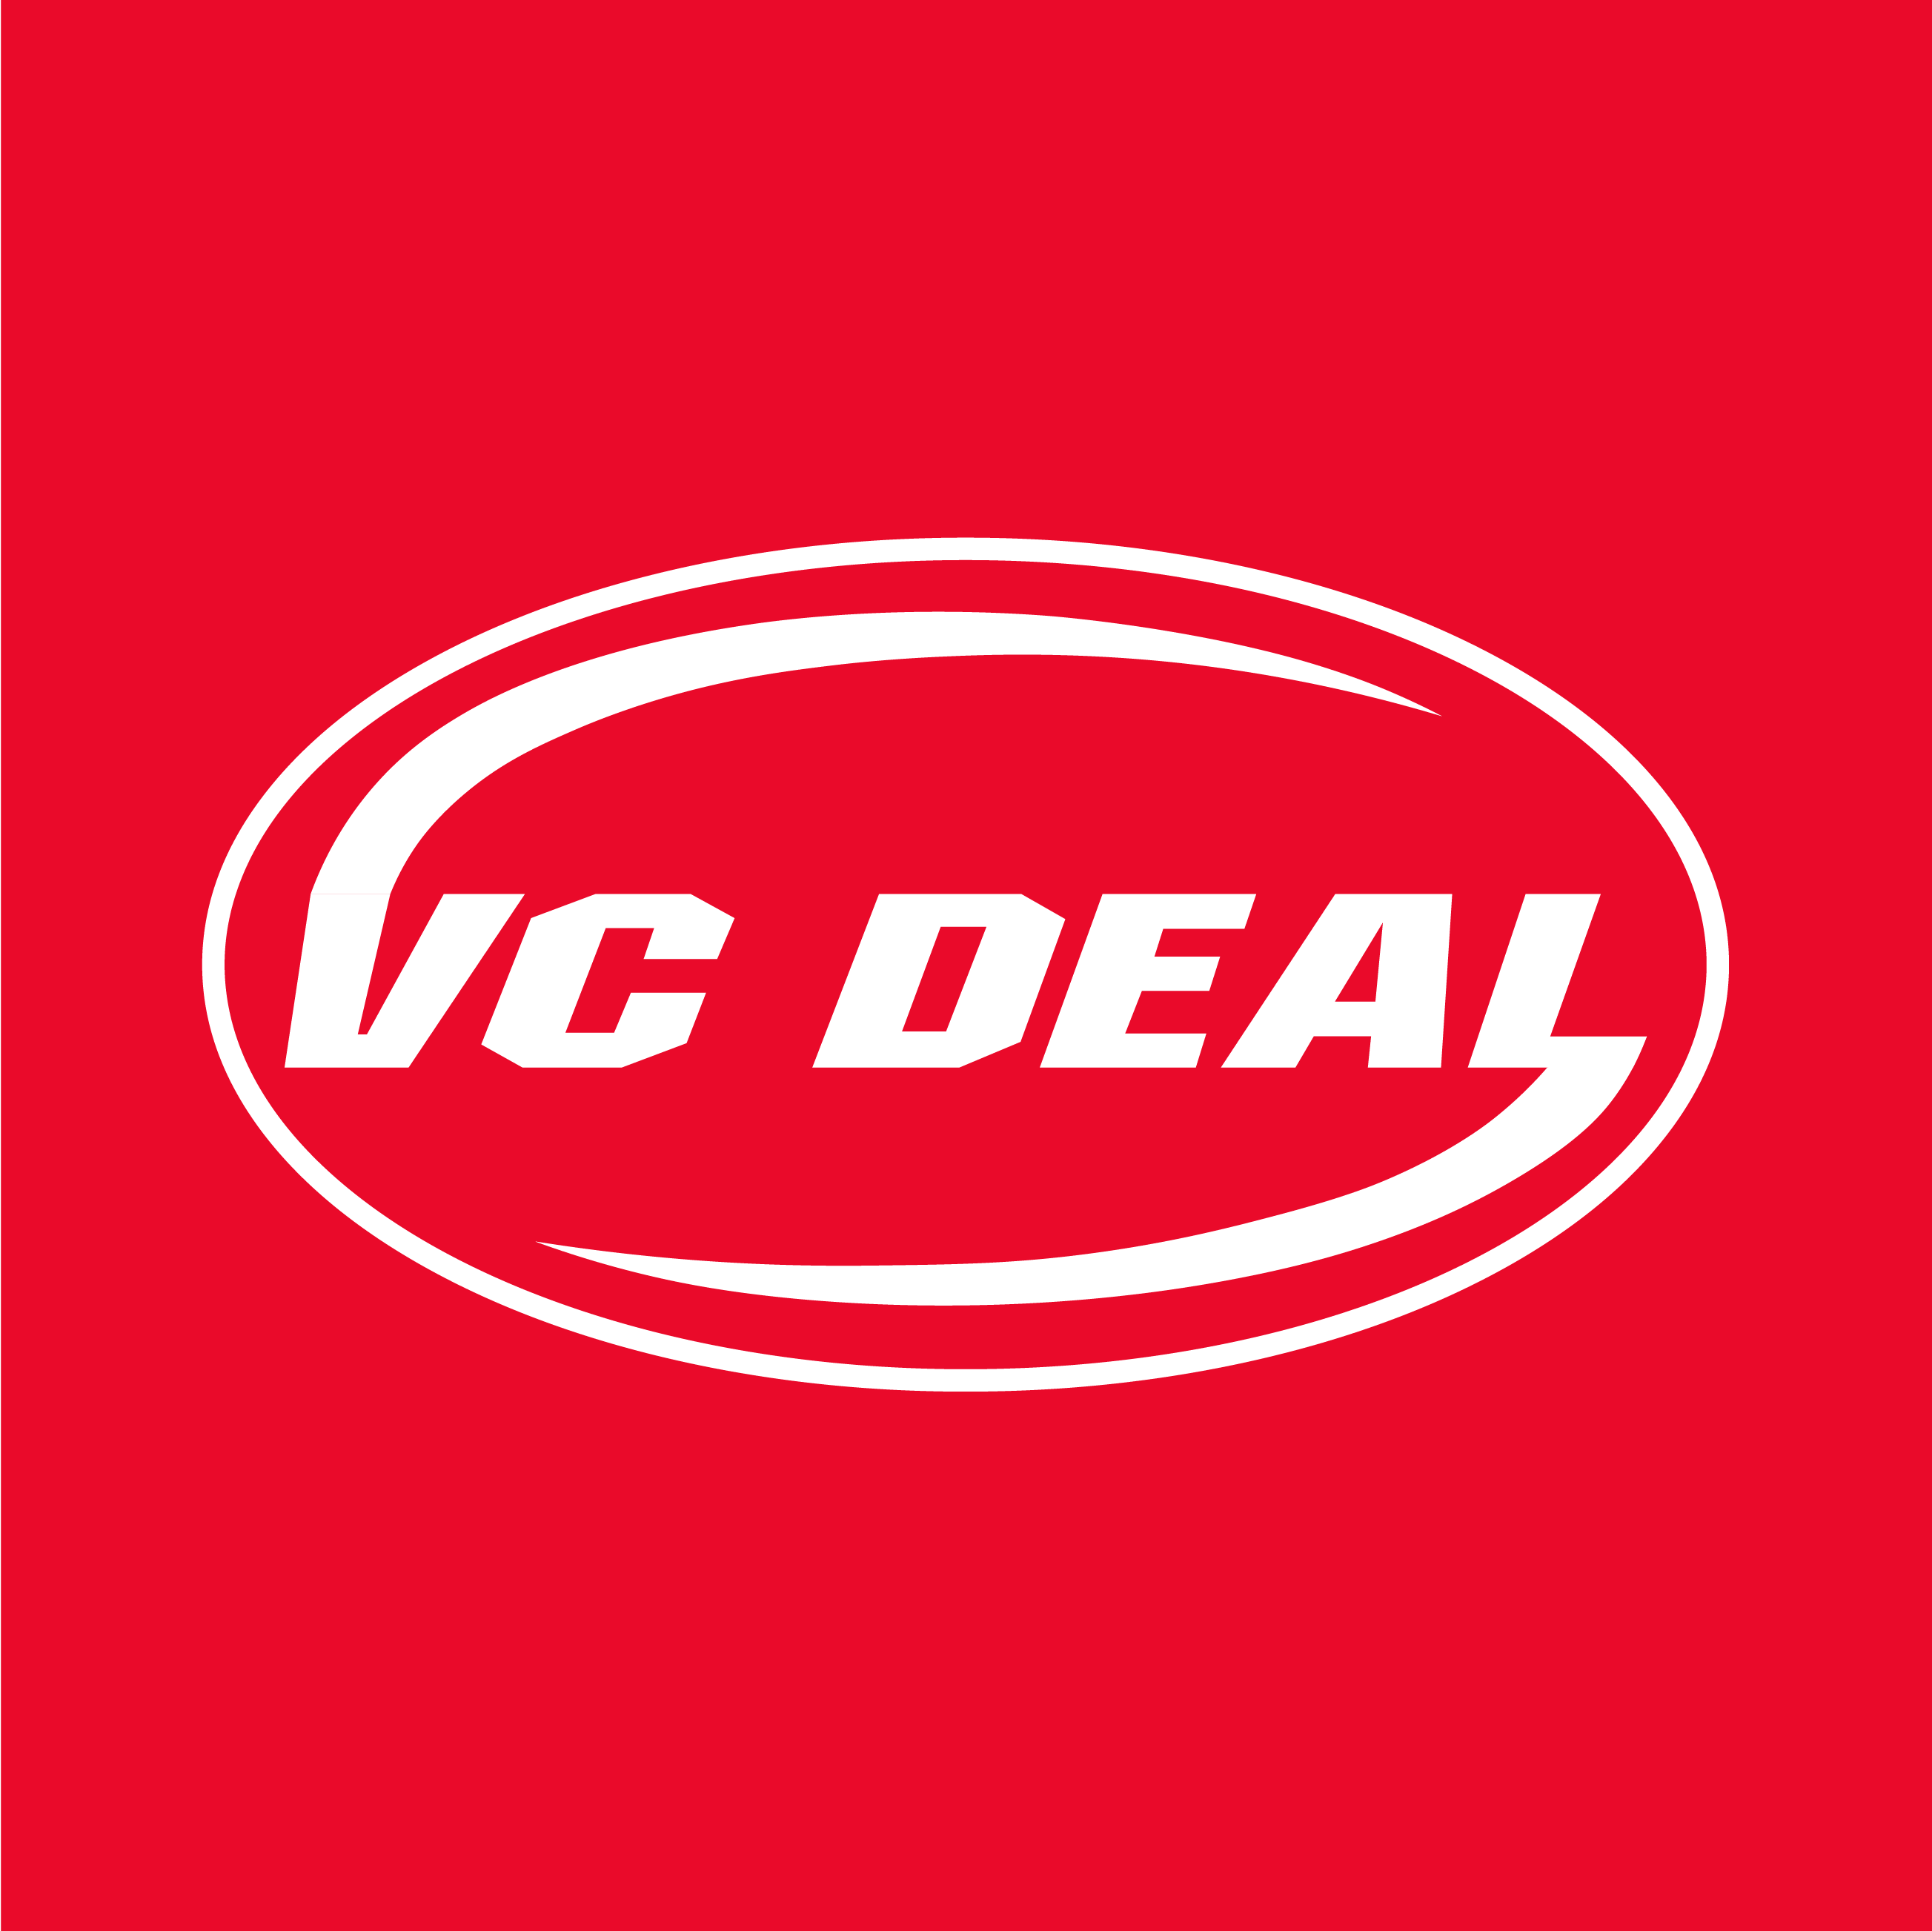 Club Image for VC DEAL